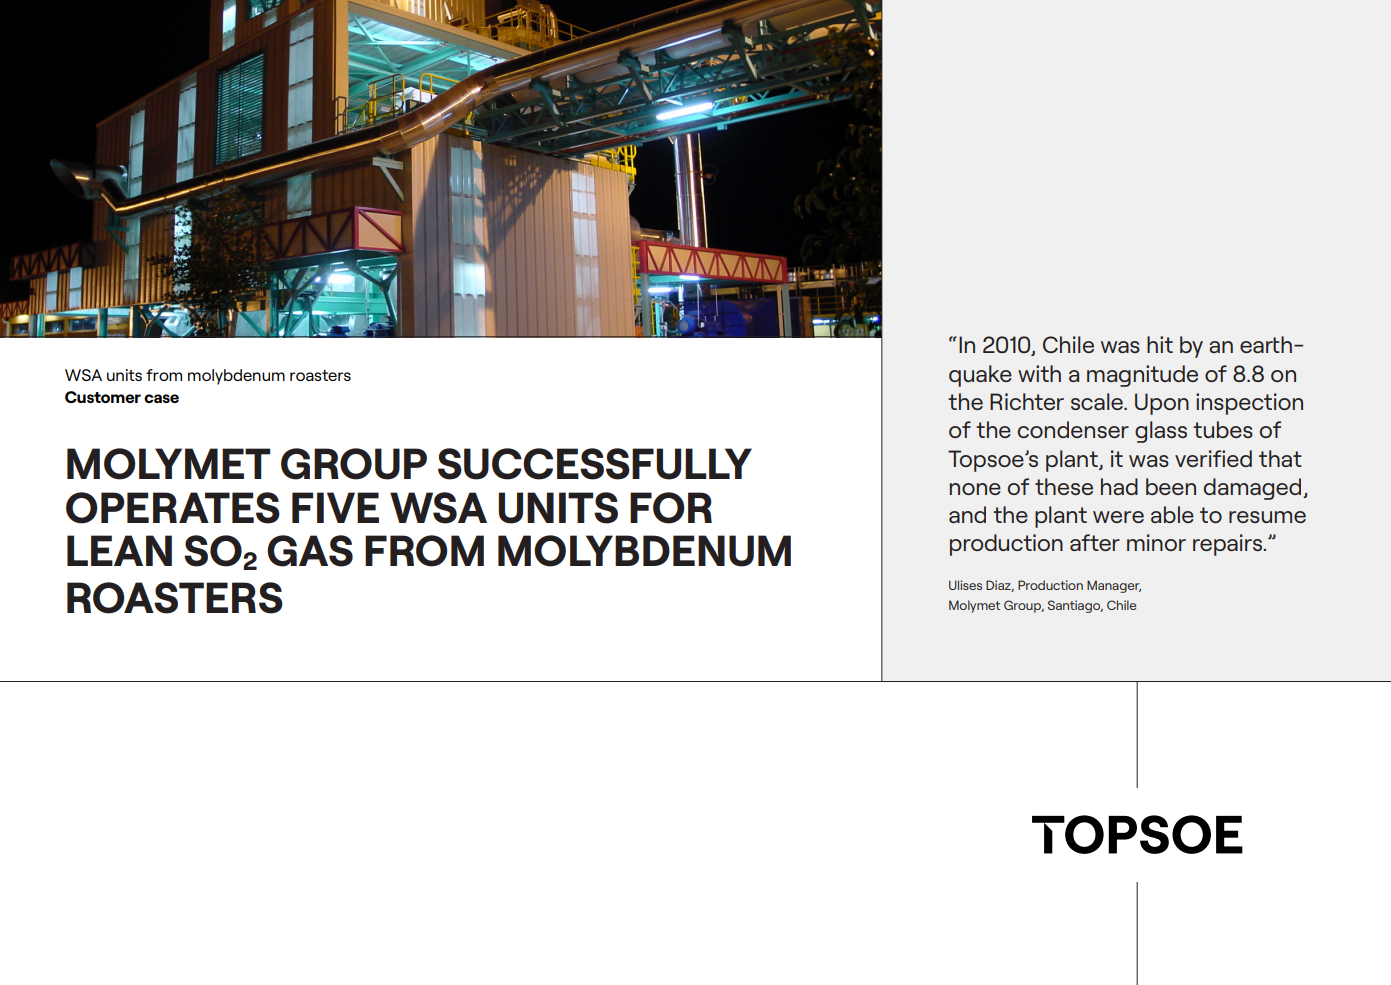 Molymet group successfully operates five units for lean SO2 gas from molybdenum roasters